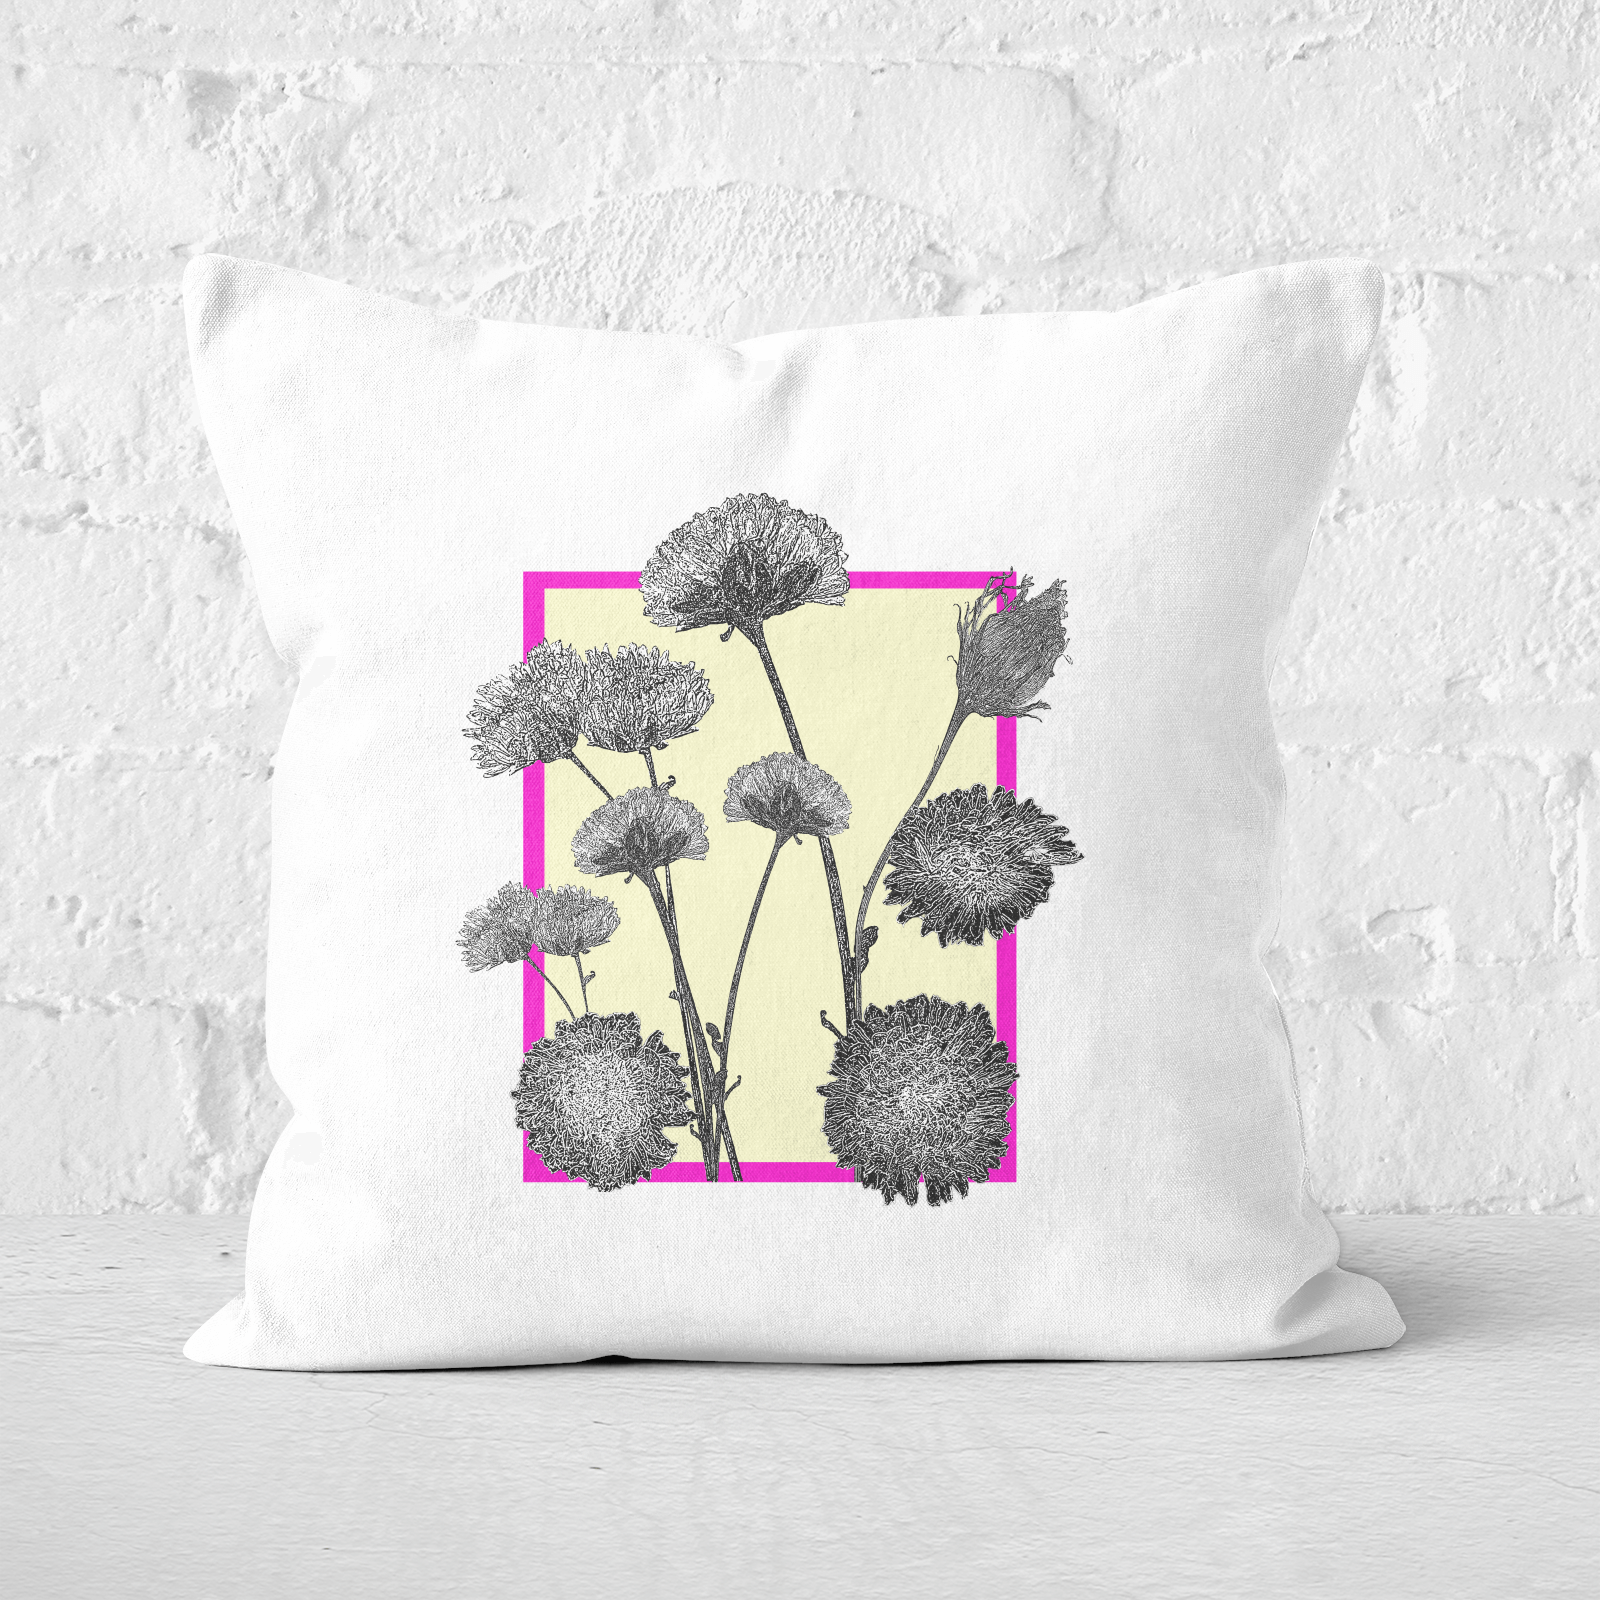 Pressed Flowers Feminine Tones Framed Sketched FLowers Square Cushion - 60x60cm - Soft Touch